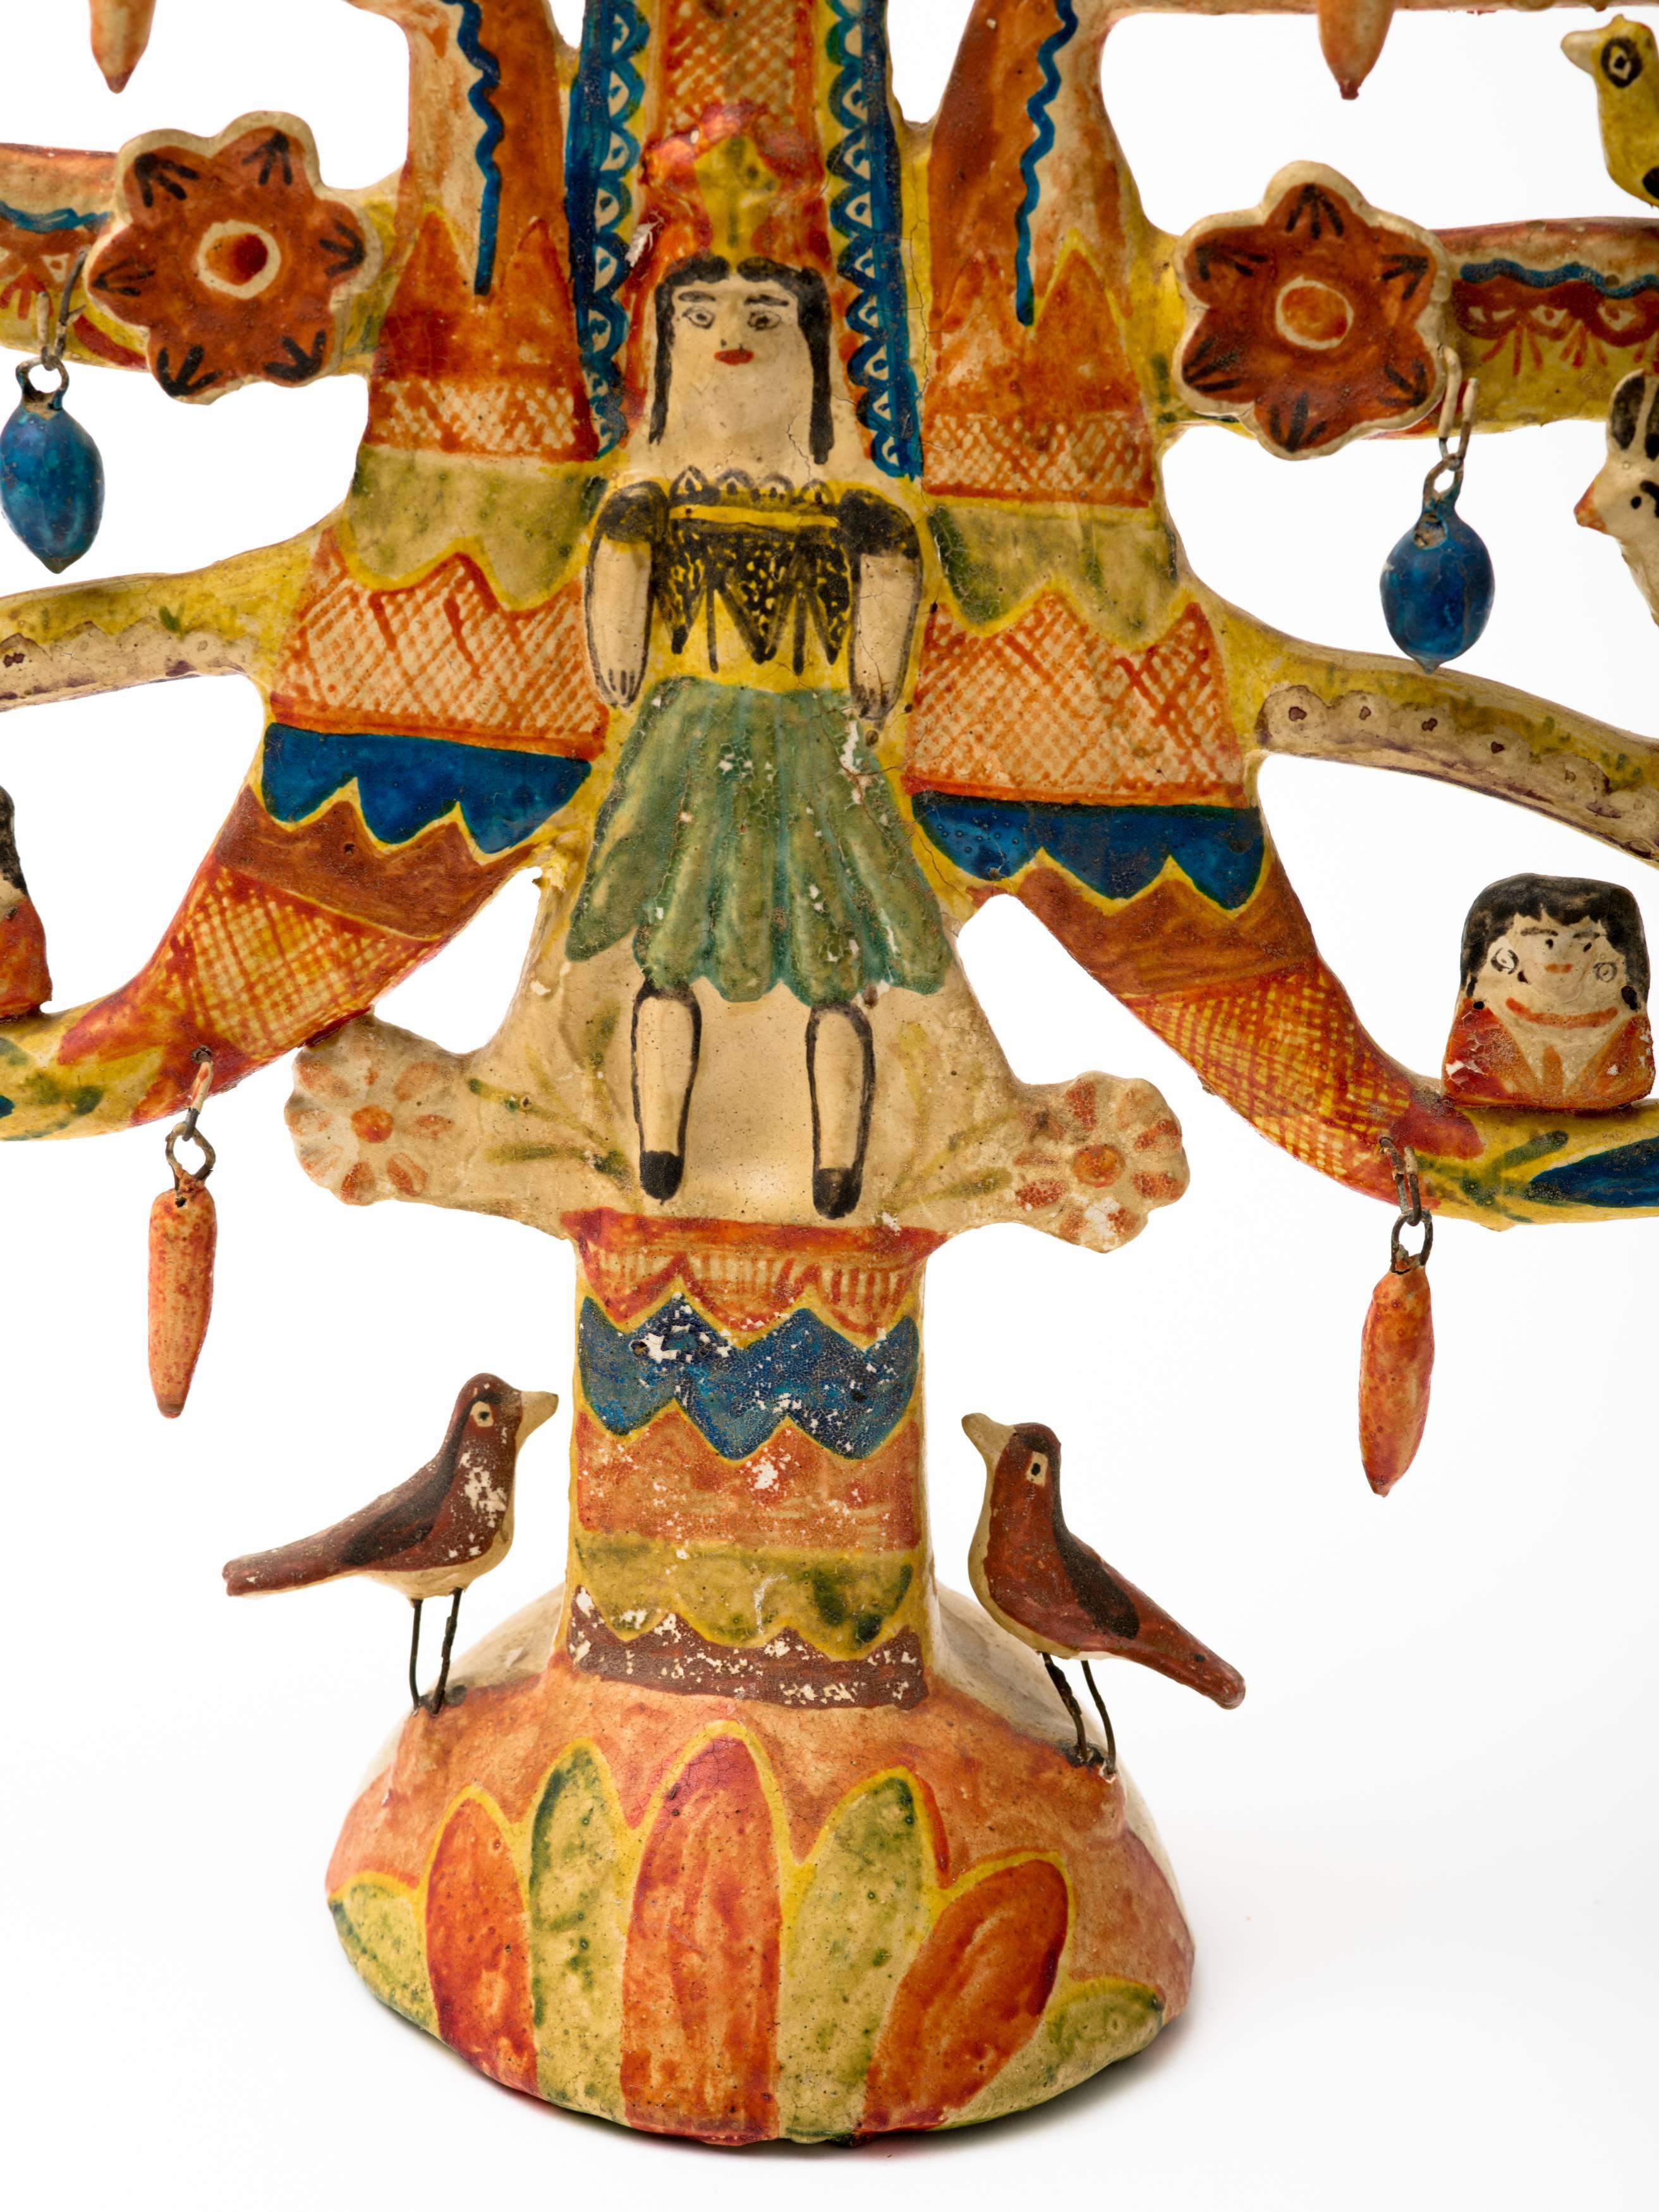 Large Aurelio Flores hand crafted pottery tree of life candelabra from Izucar de Matamoros, Mexico, circa 1950s. Flores began the tradition of crafting what are called arbol de la vida in his village, and is considered the master of the work. He